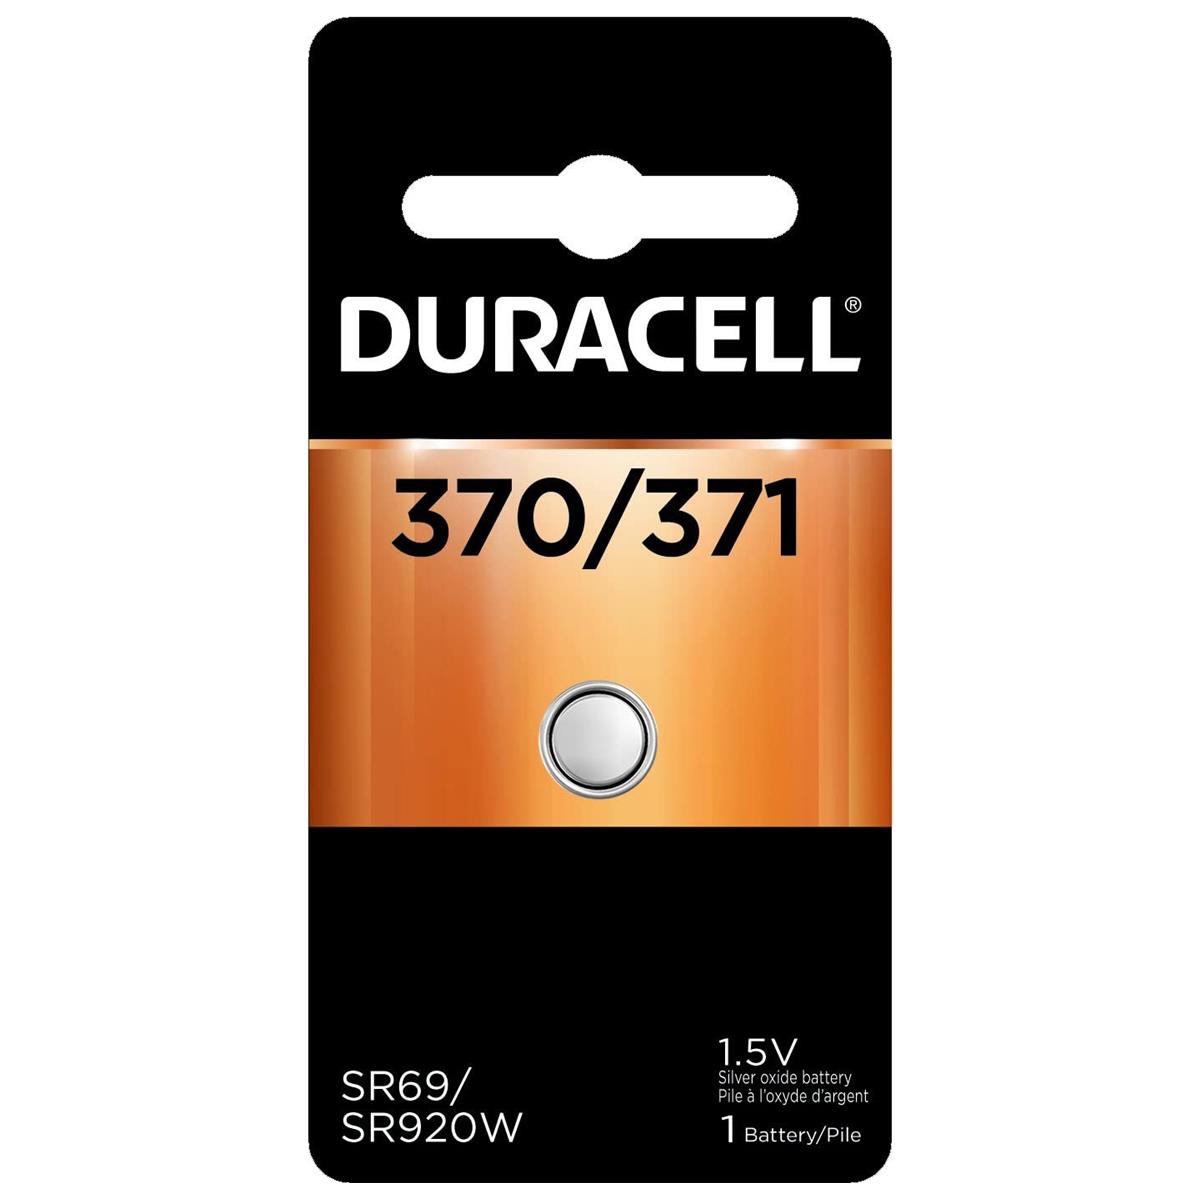 Image of Duracell D370/371 1.5V Watch/Electronic Silver Oxide Battery